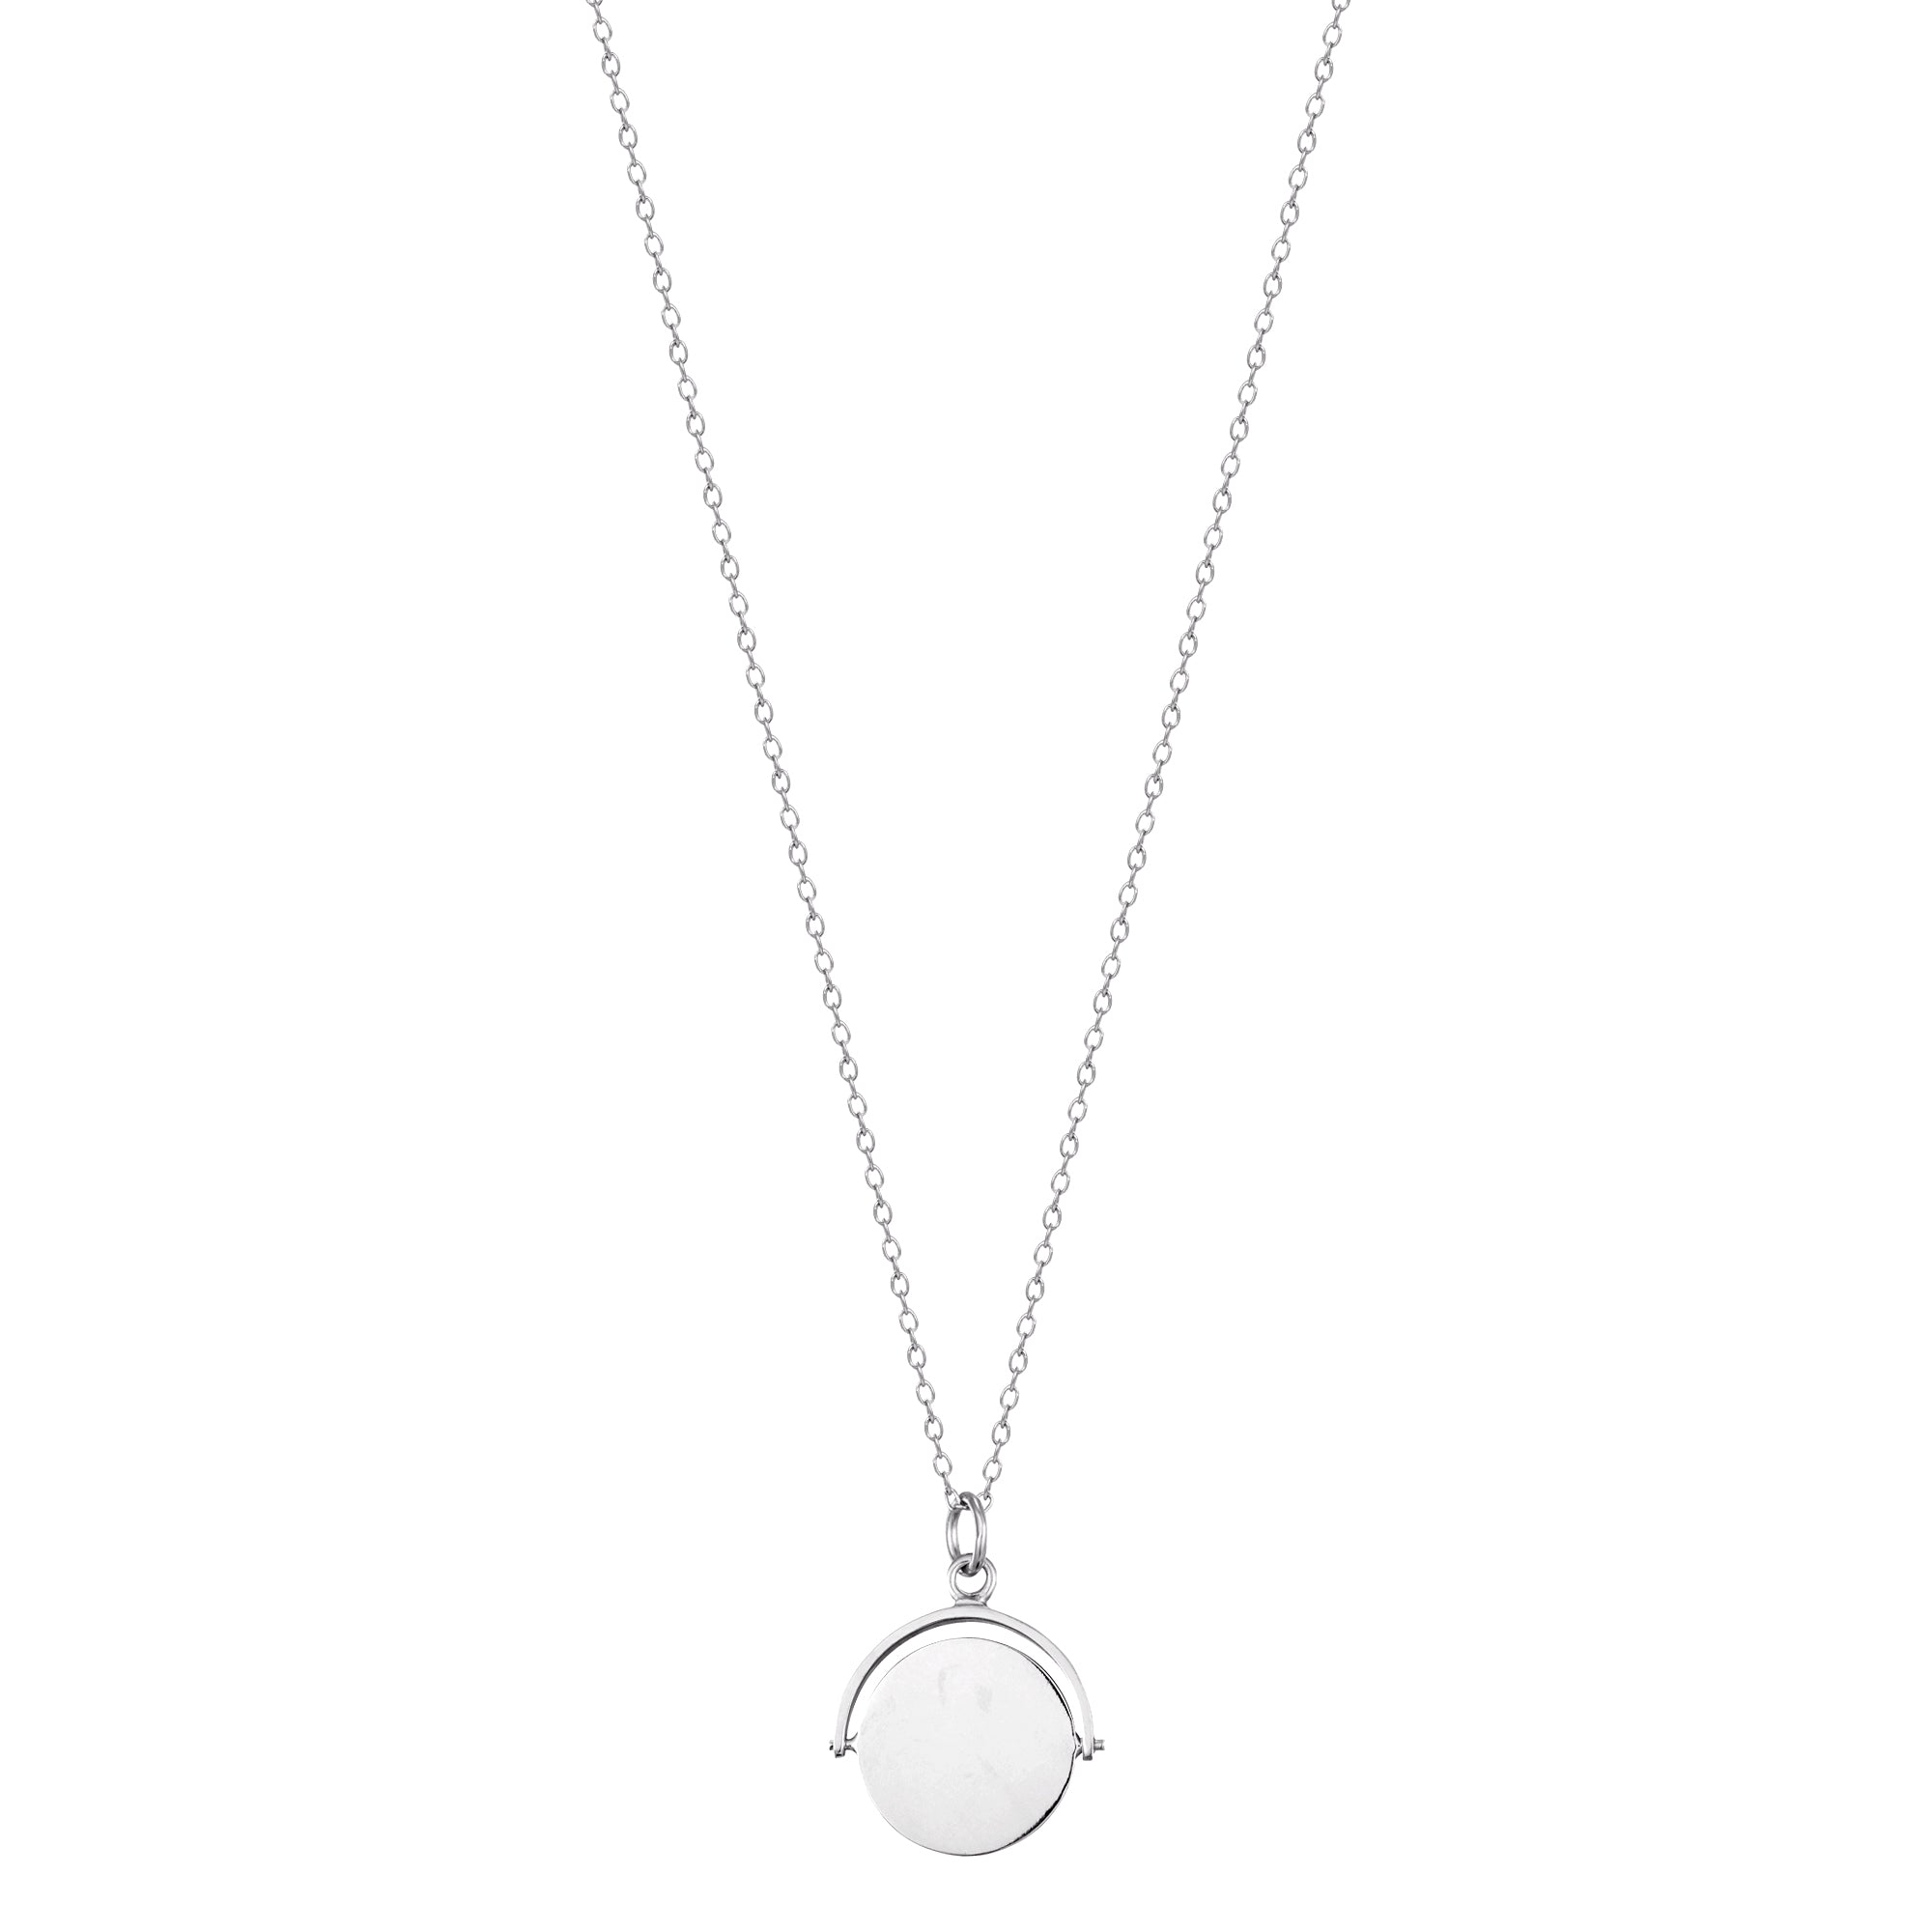 Sterling Silver Spinning Disc Necklace